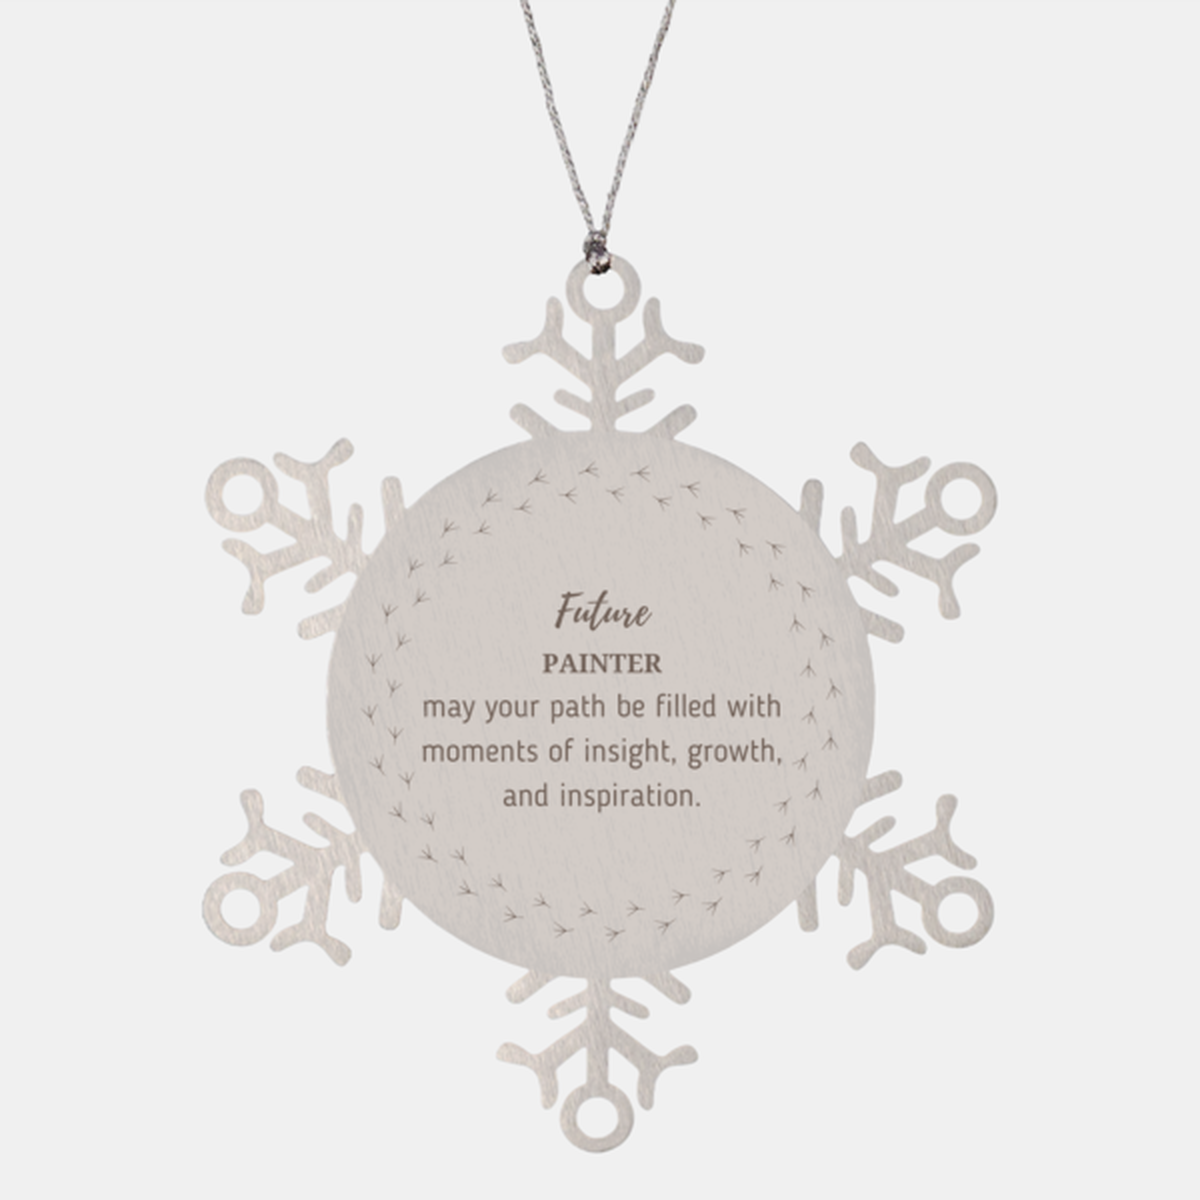 Future Painter Gifts, May your path be filled with moments of insight, Graduation Gifts for New Painter, Christmas Unique Snowflake Ornament For Men, Women, Friends